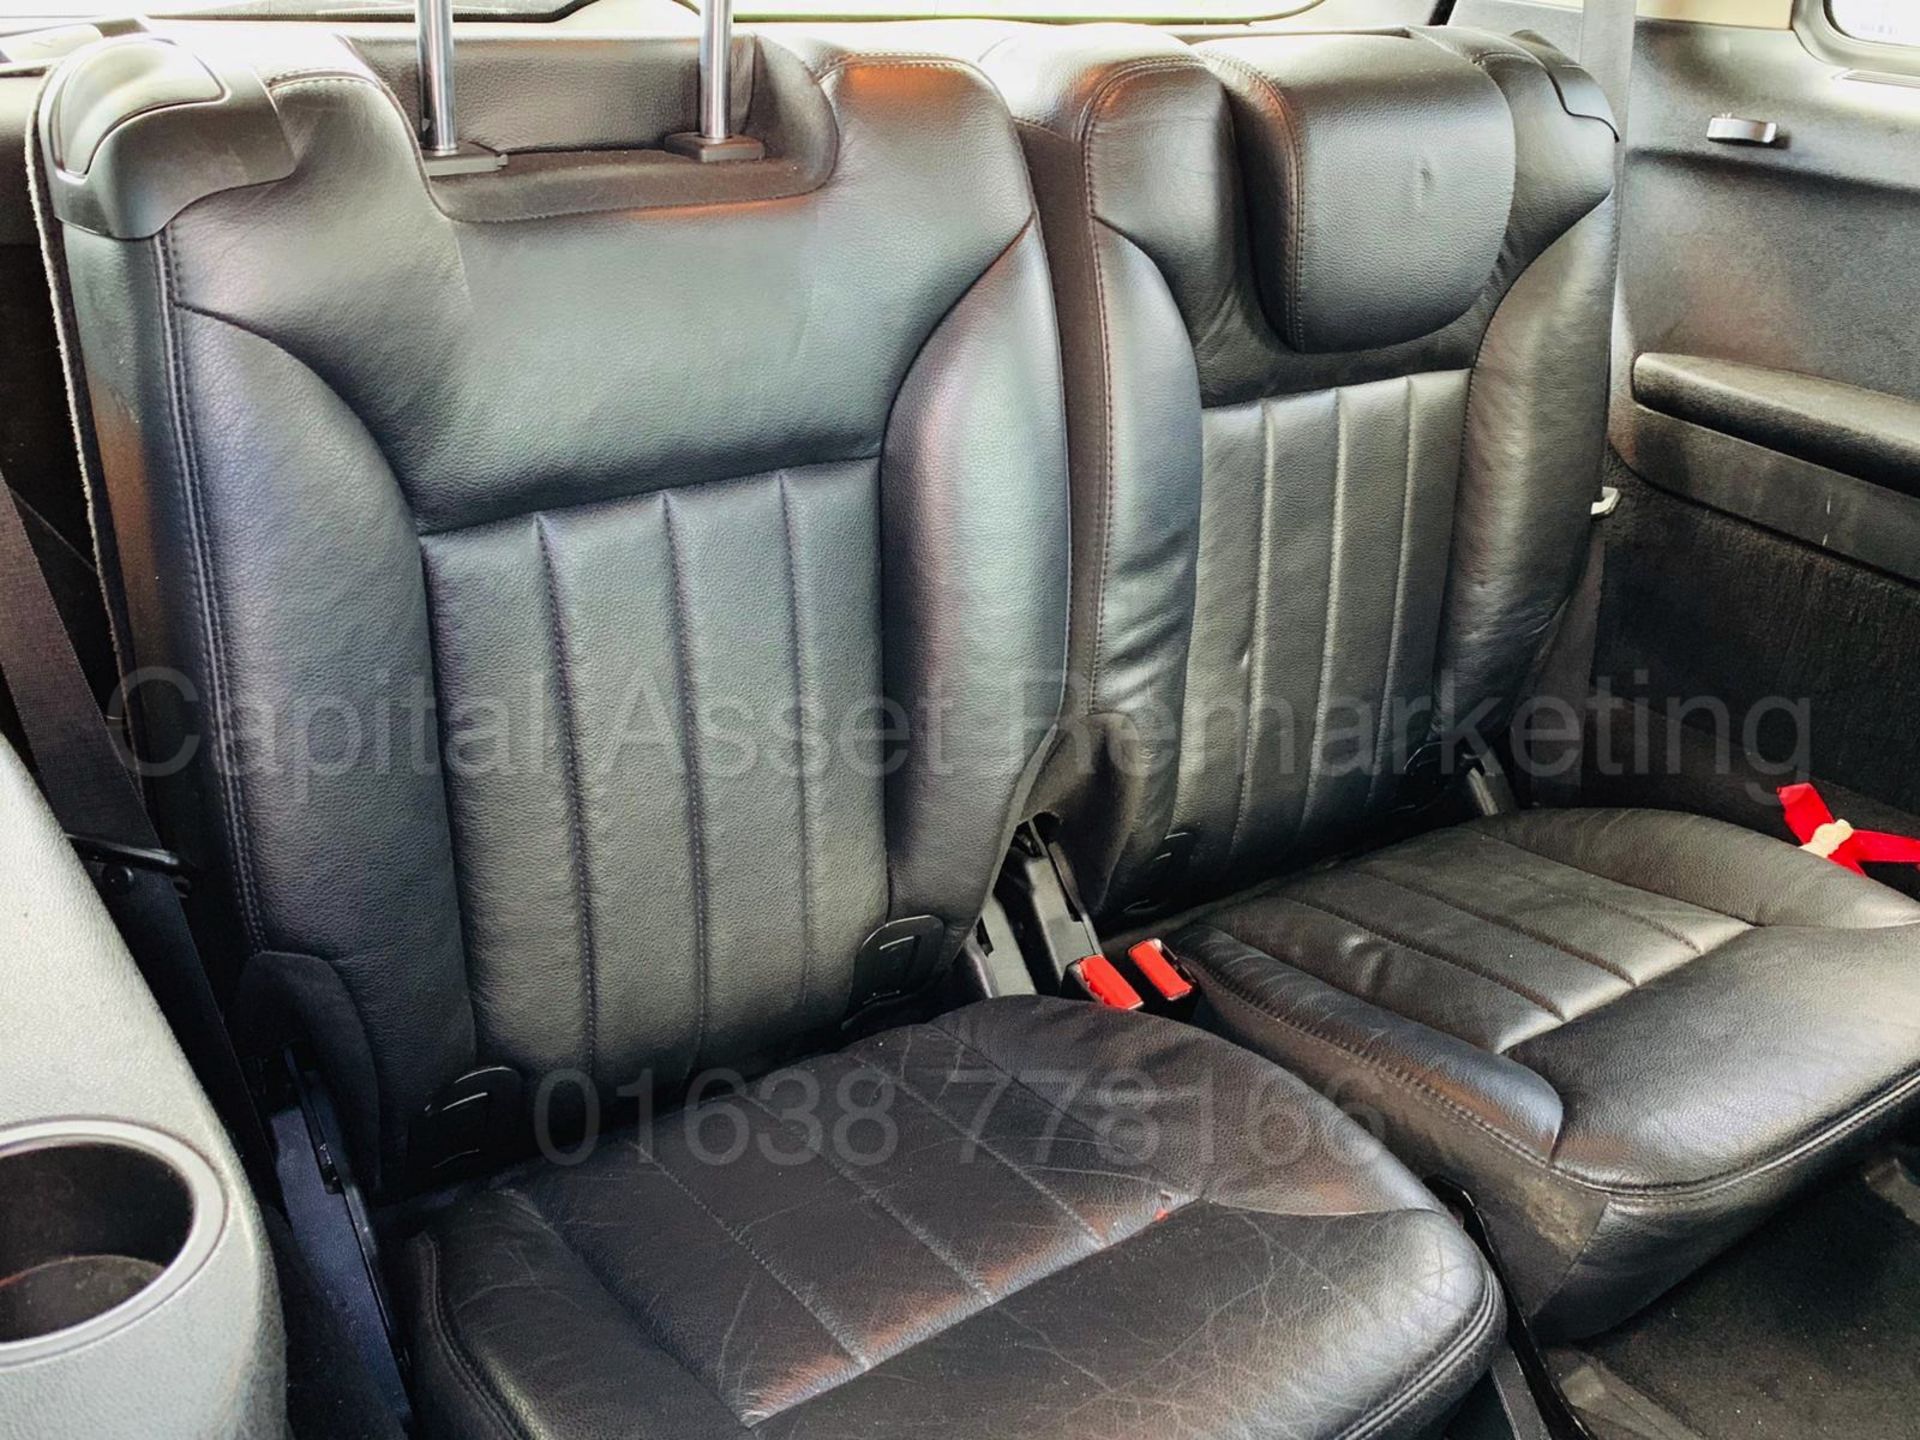 (On Sale) MERCEDES-BENZ R280 CDI *4-MATIC* 6 SEATER MPV (2007) '3.0 DIESEL - 190 BHP - AUTO' - Image 16 of 36